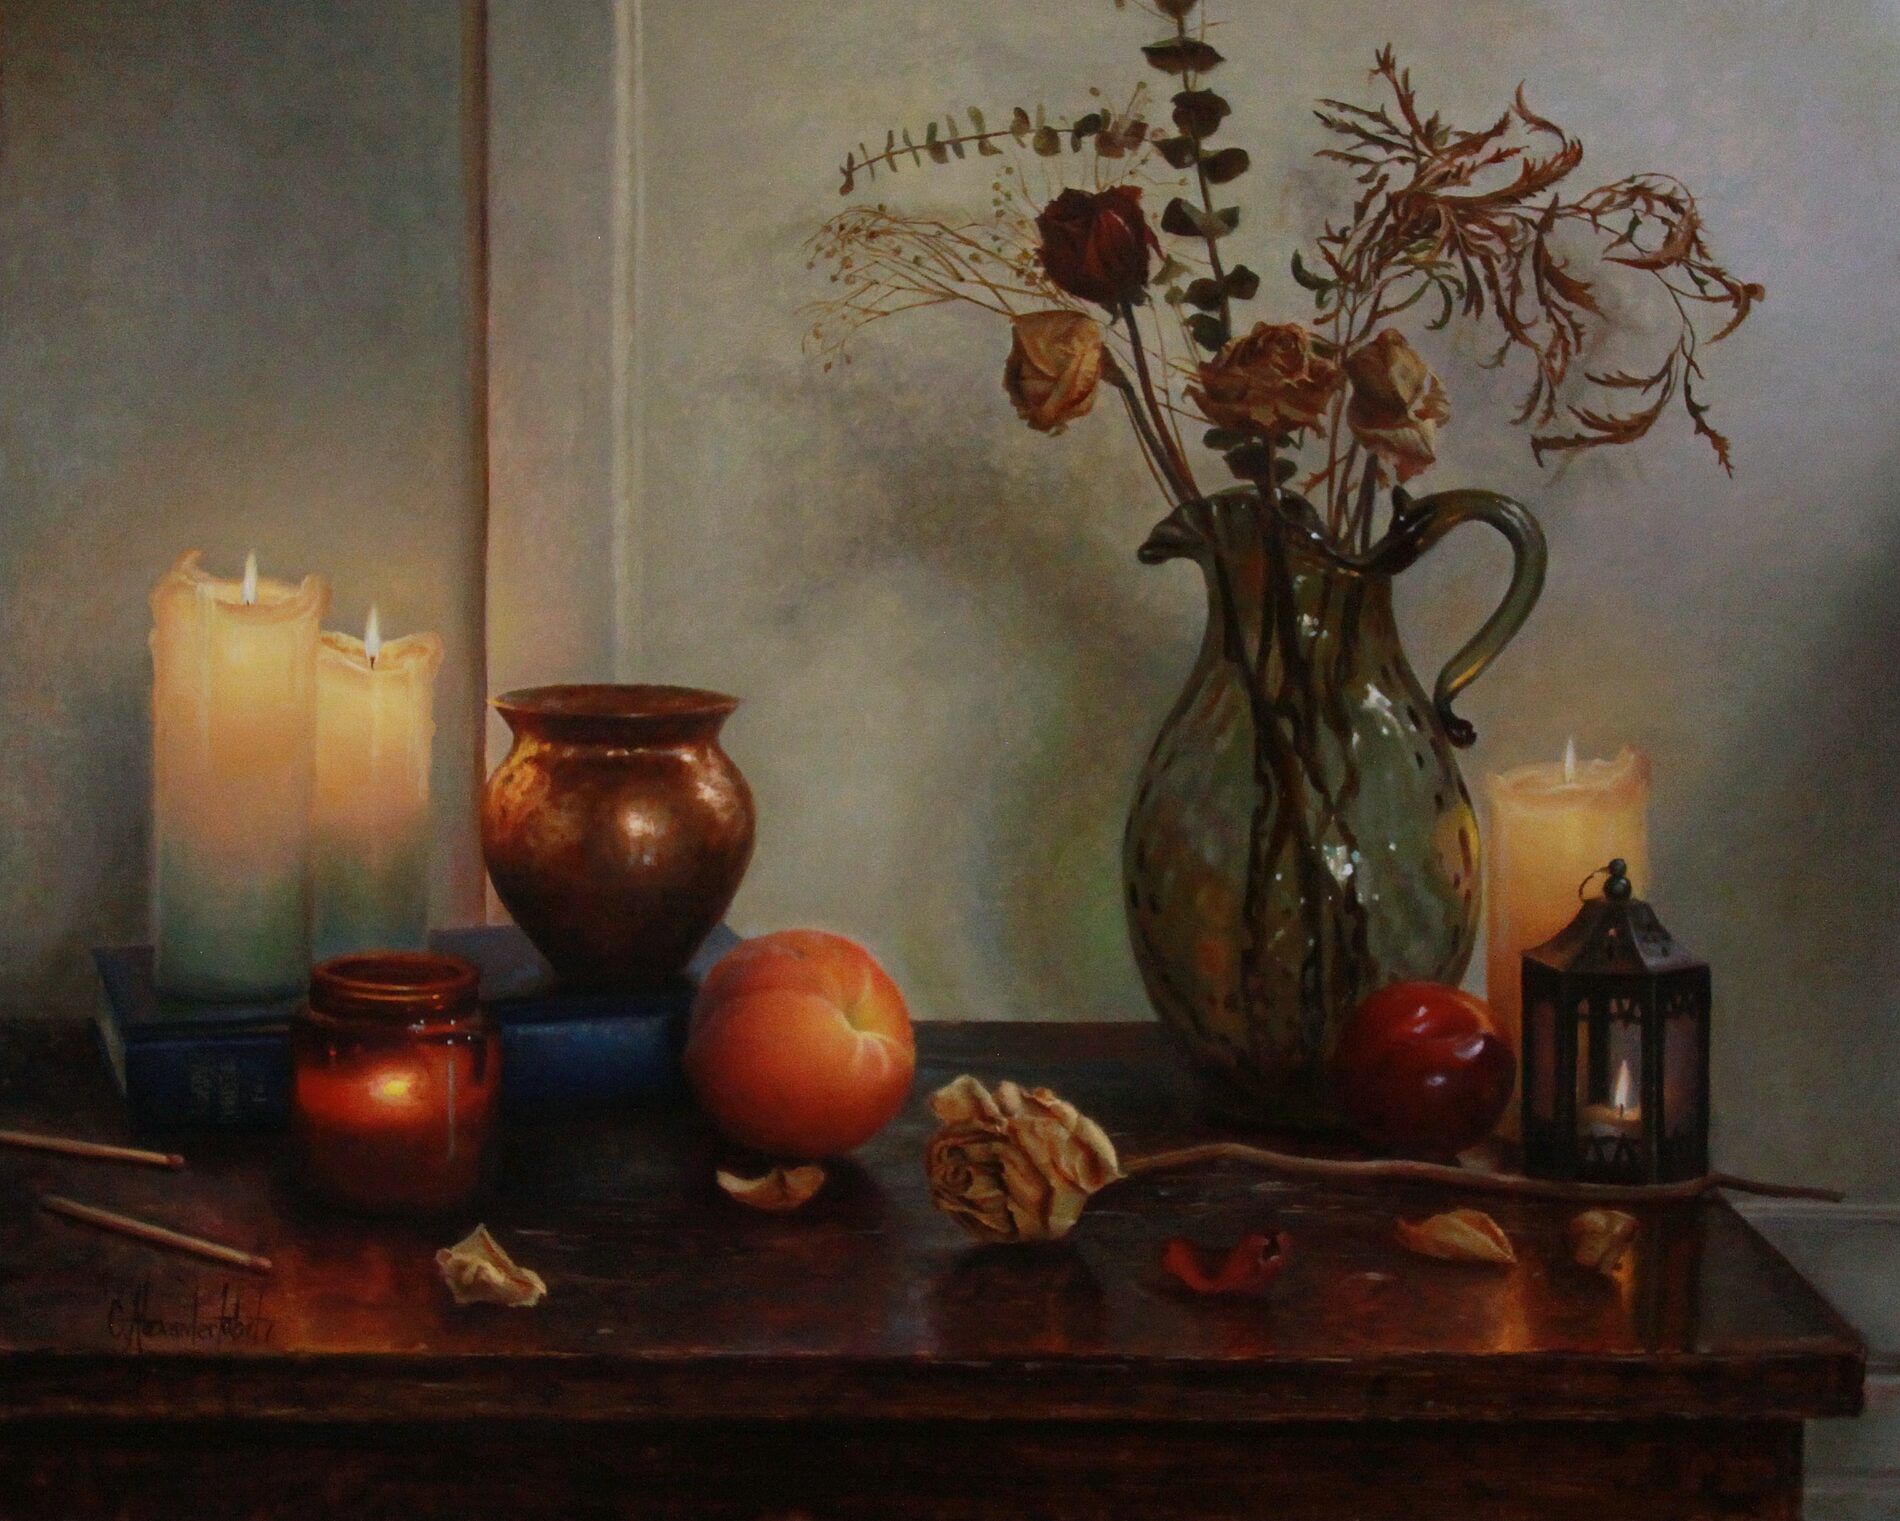 A table with a vase of flowers, lit candles, a peach, an apple, long matches, and a dead flower on a table.